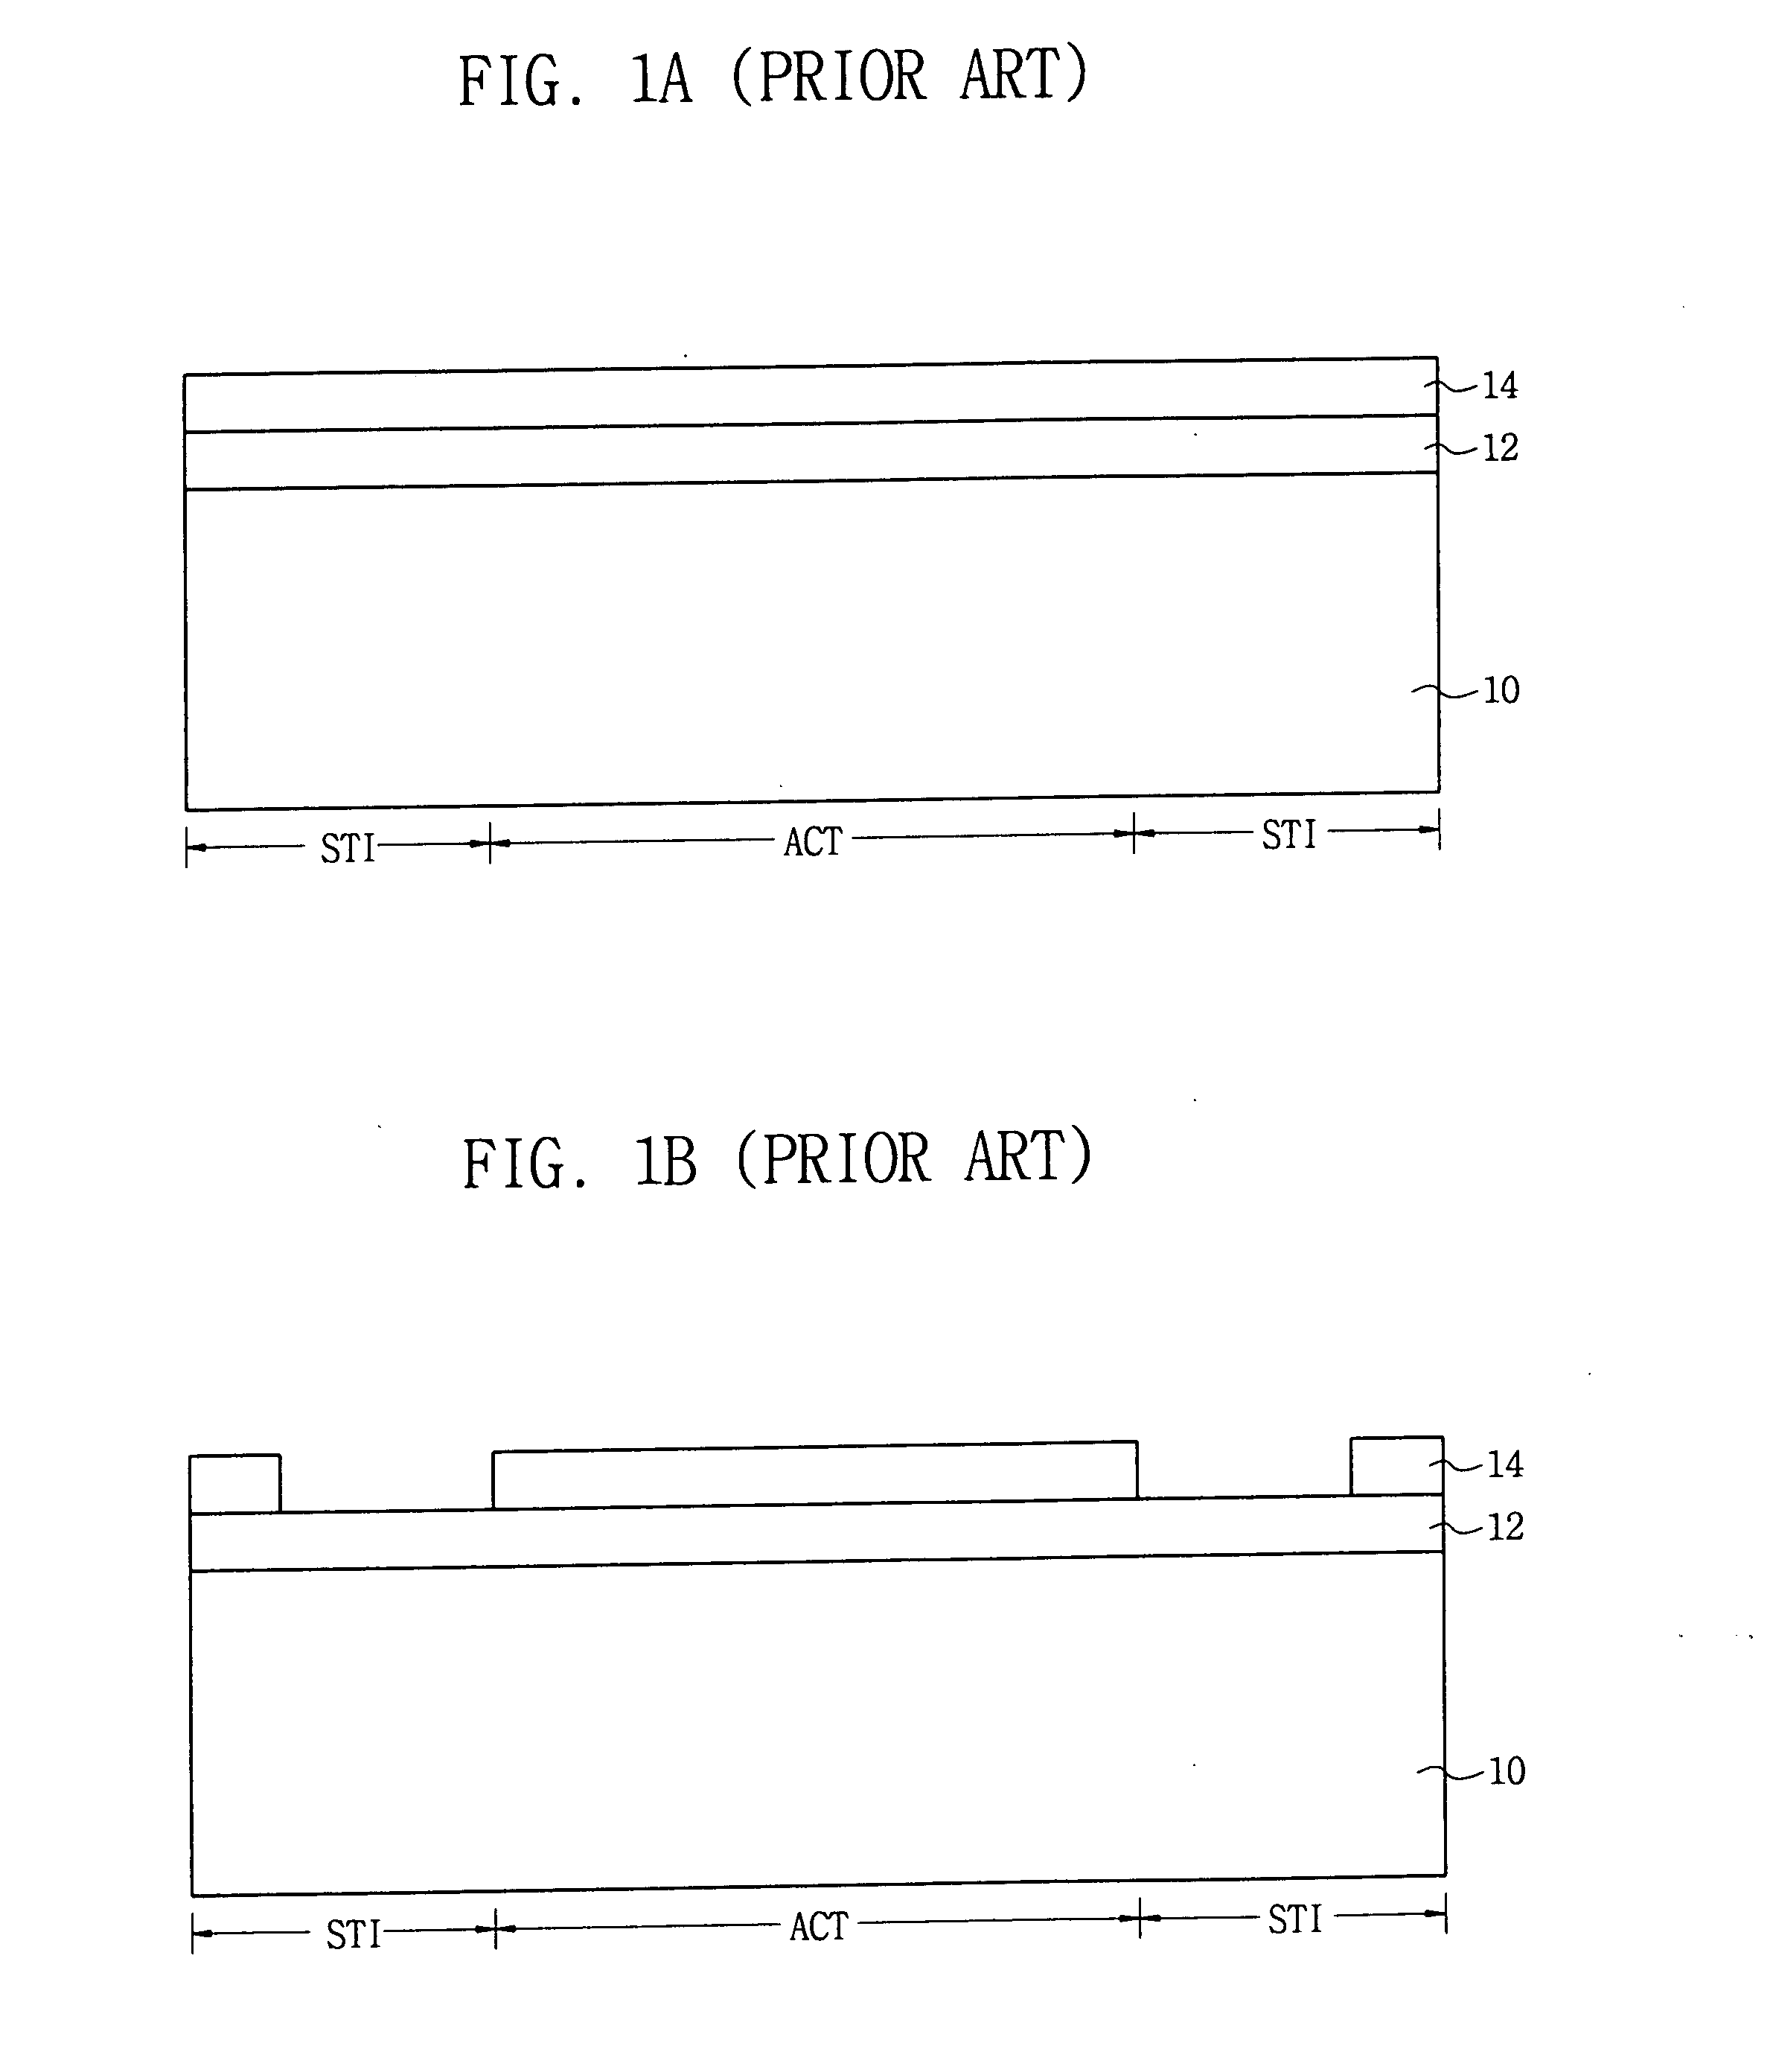 Asymmetric MOS transistor with trench-type gate